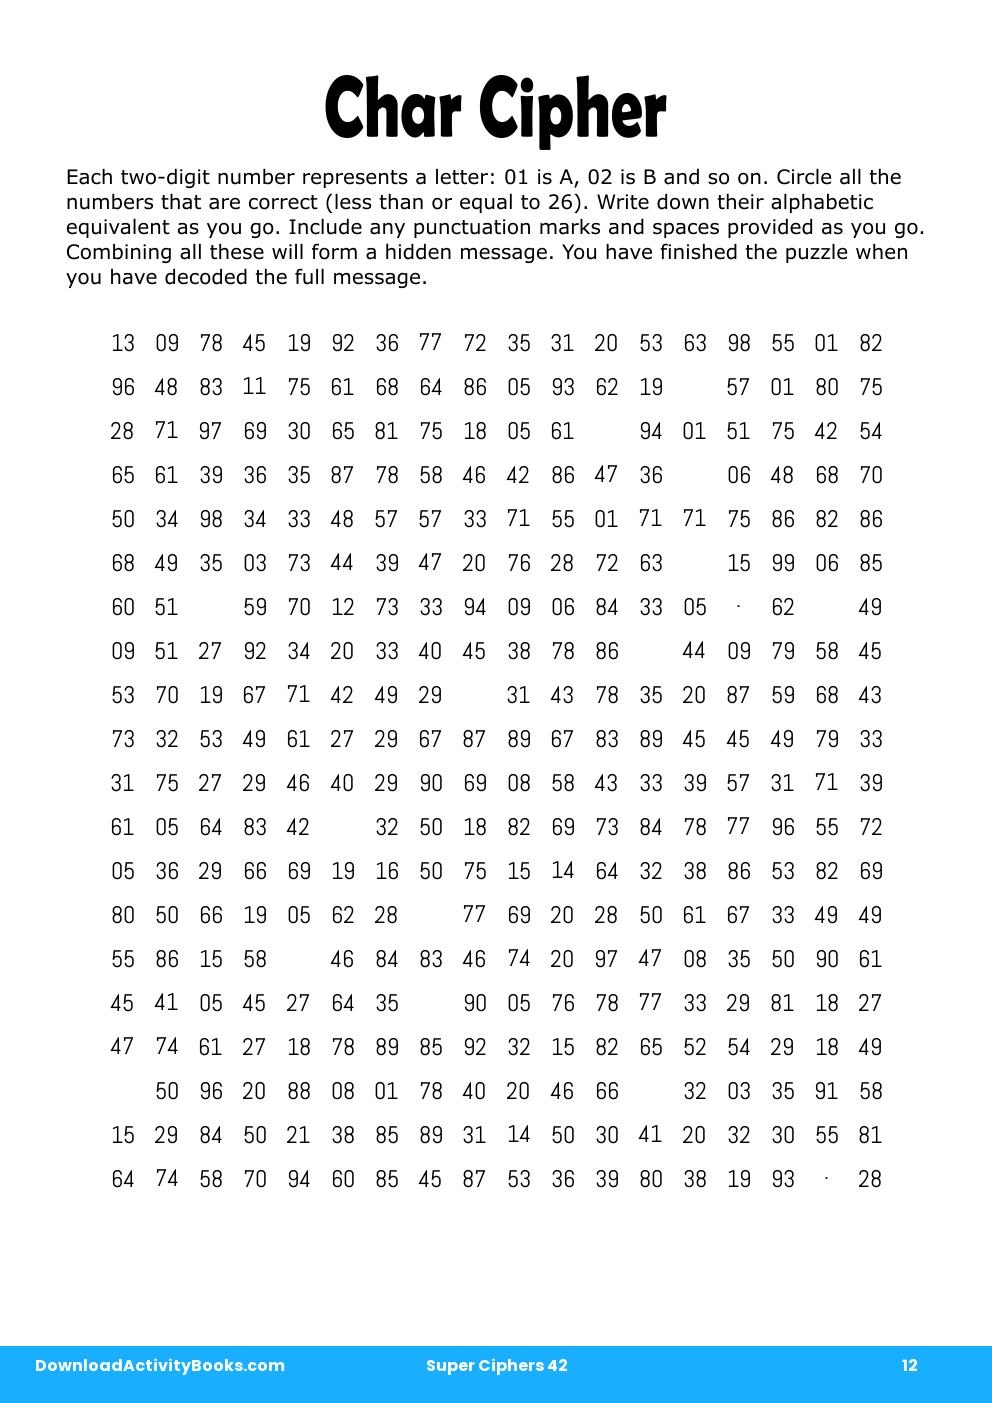 Char Cipher in Super Ciphers 42